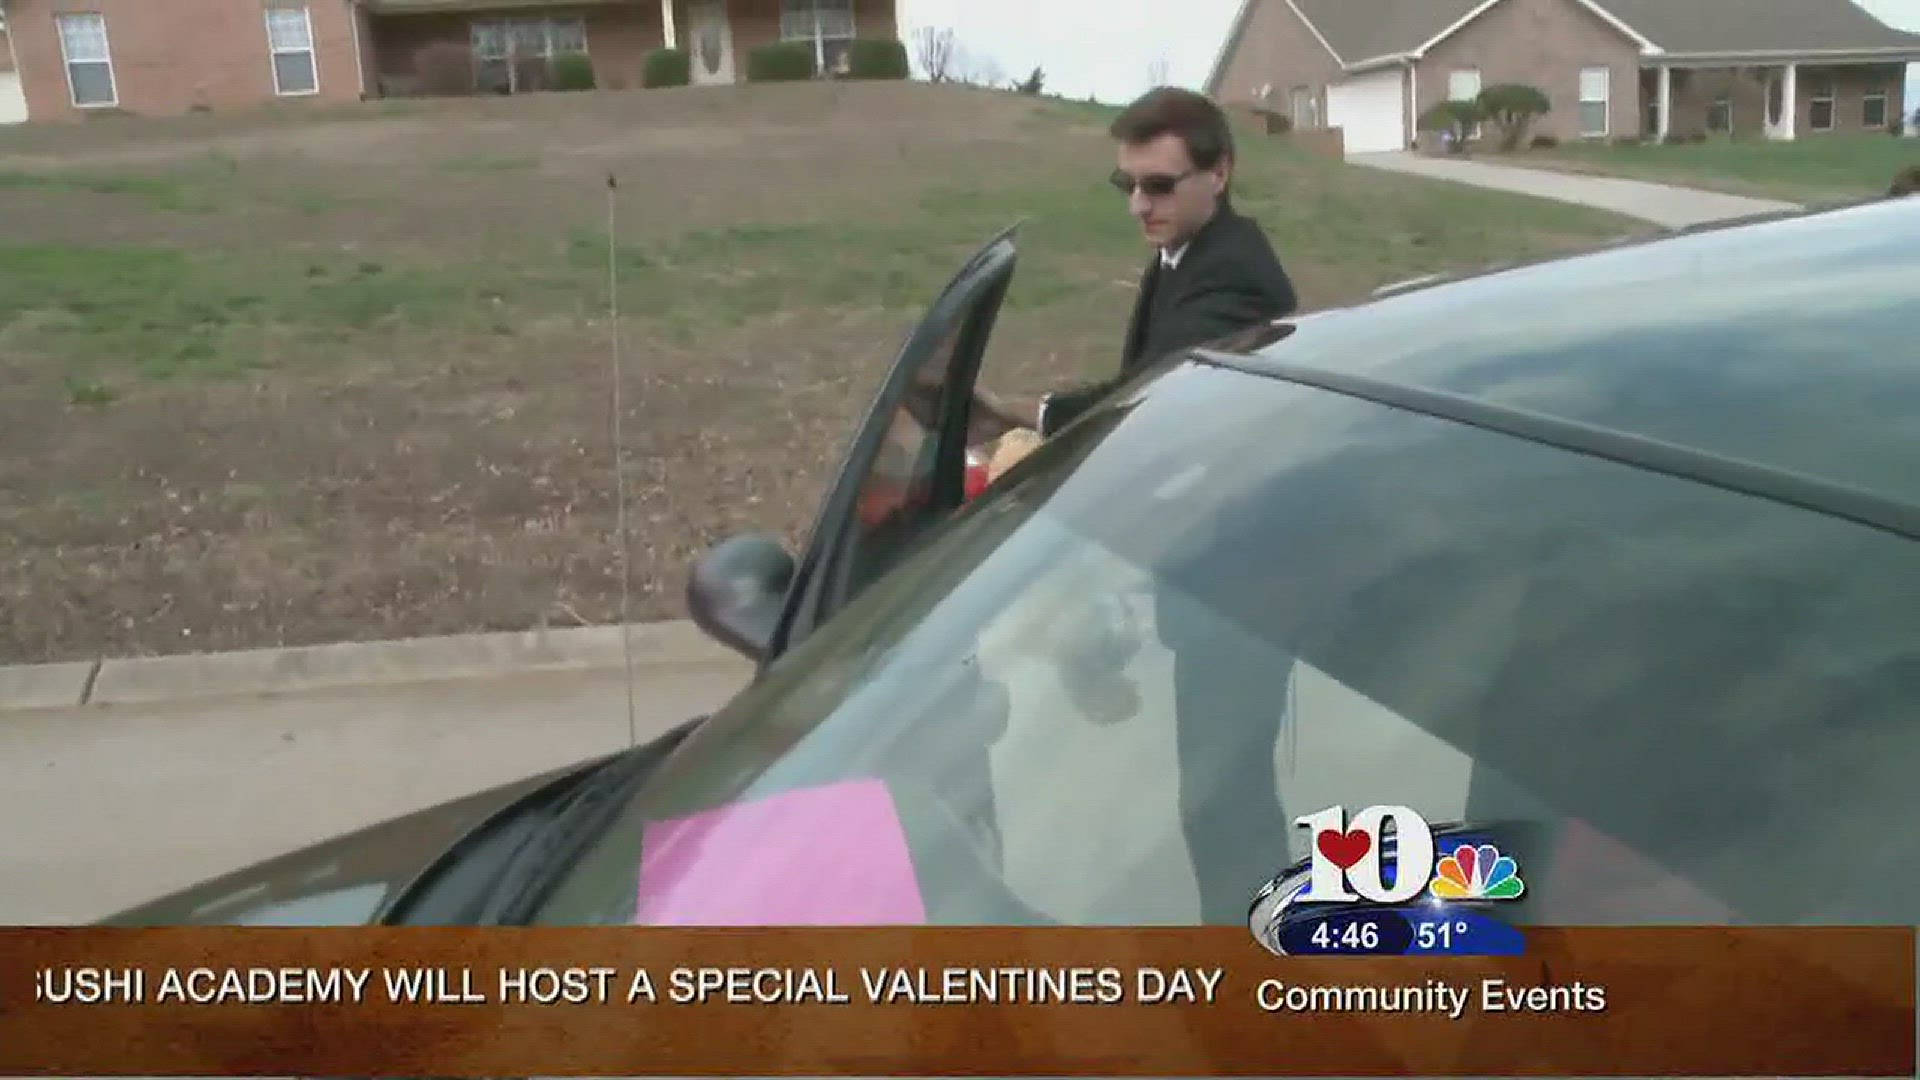 Local guys load up and deliver surprise Valentine's Day gifts to single women.